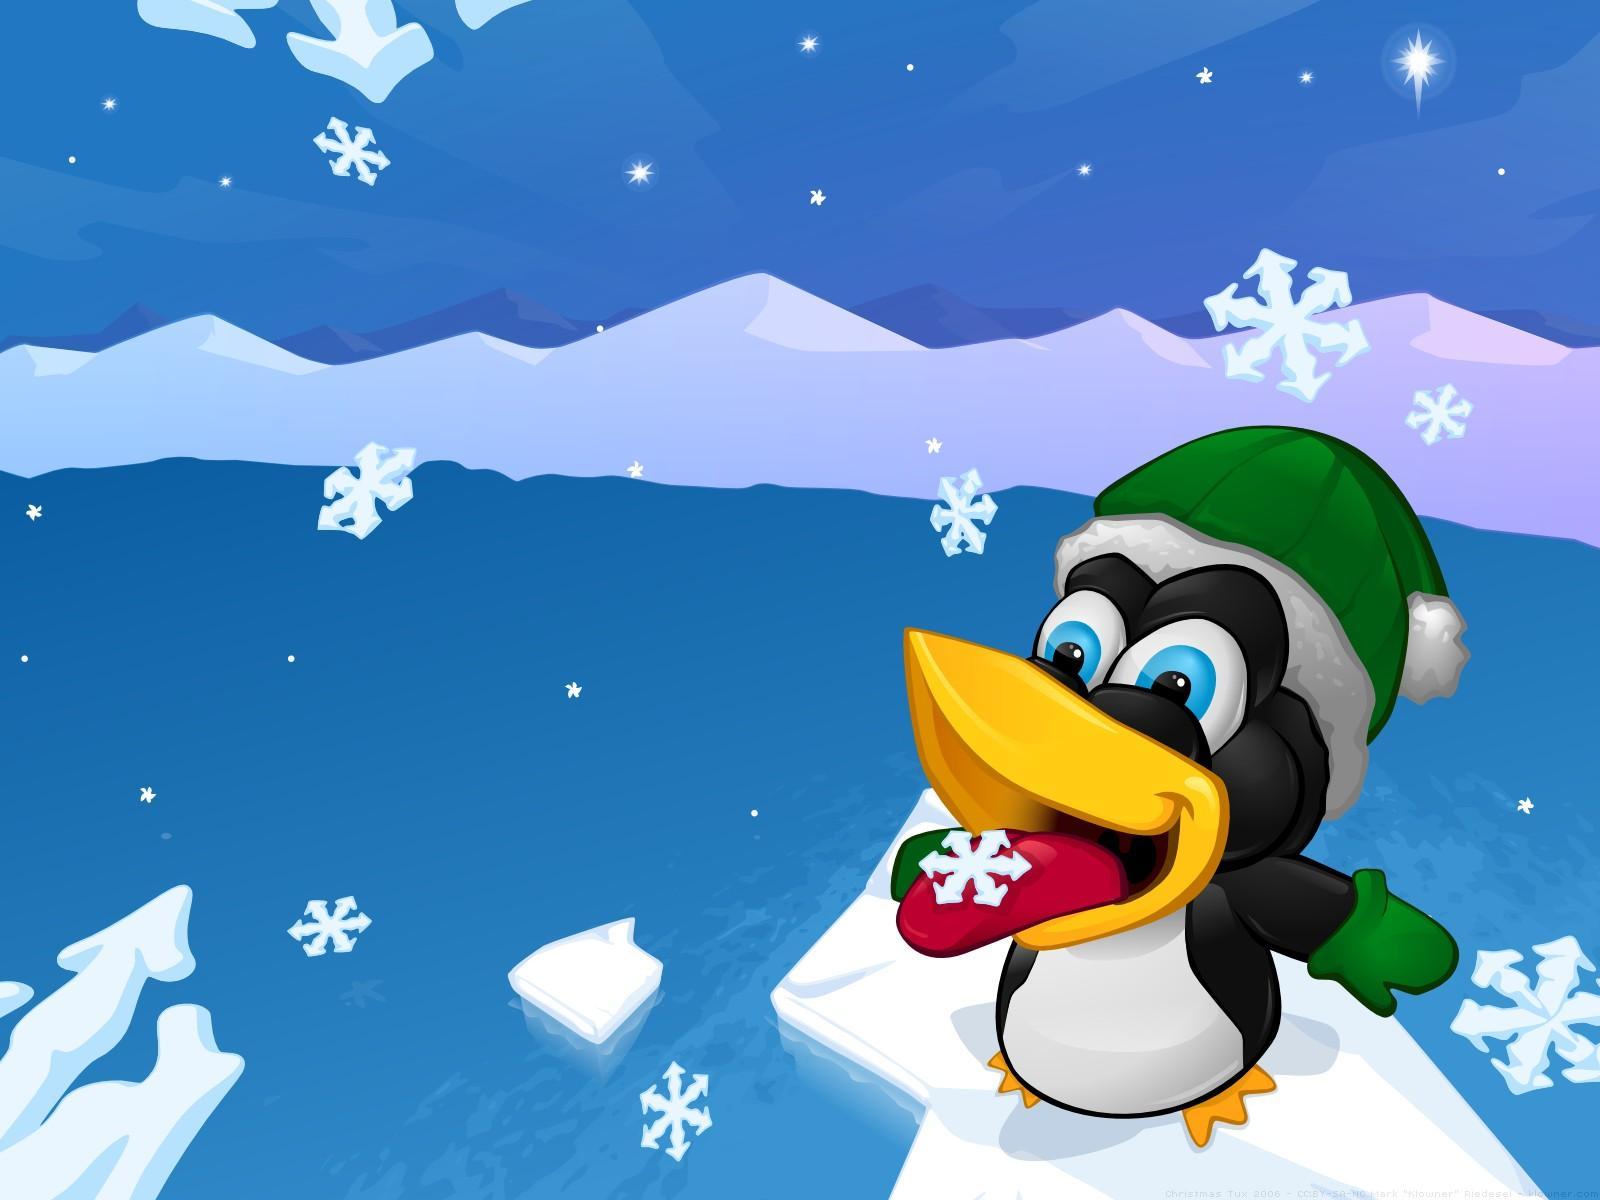 pinguins, winter, pictures, snowflakes, blue